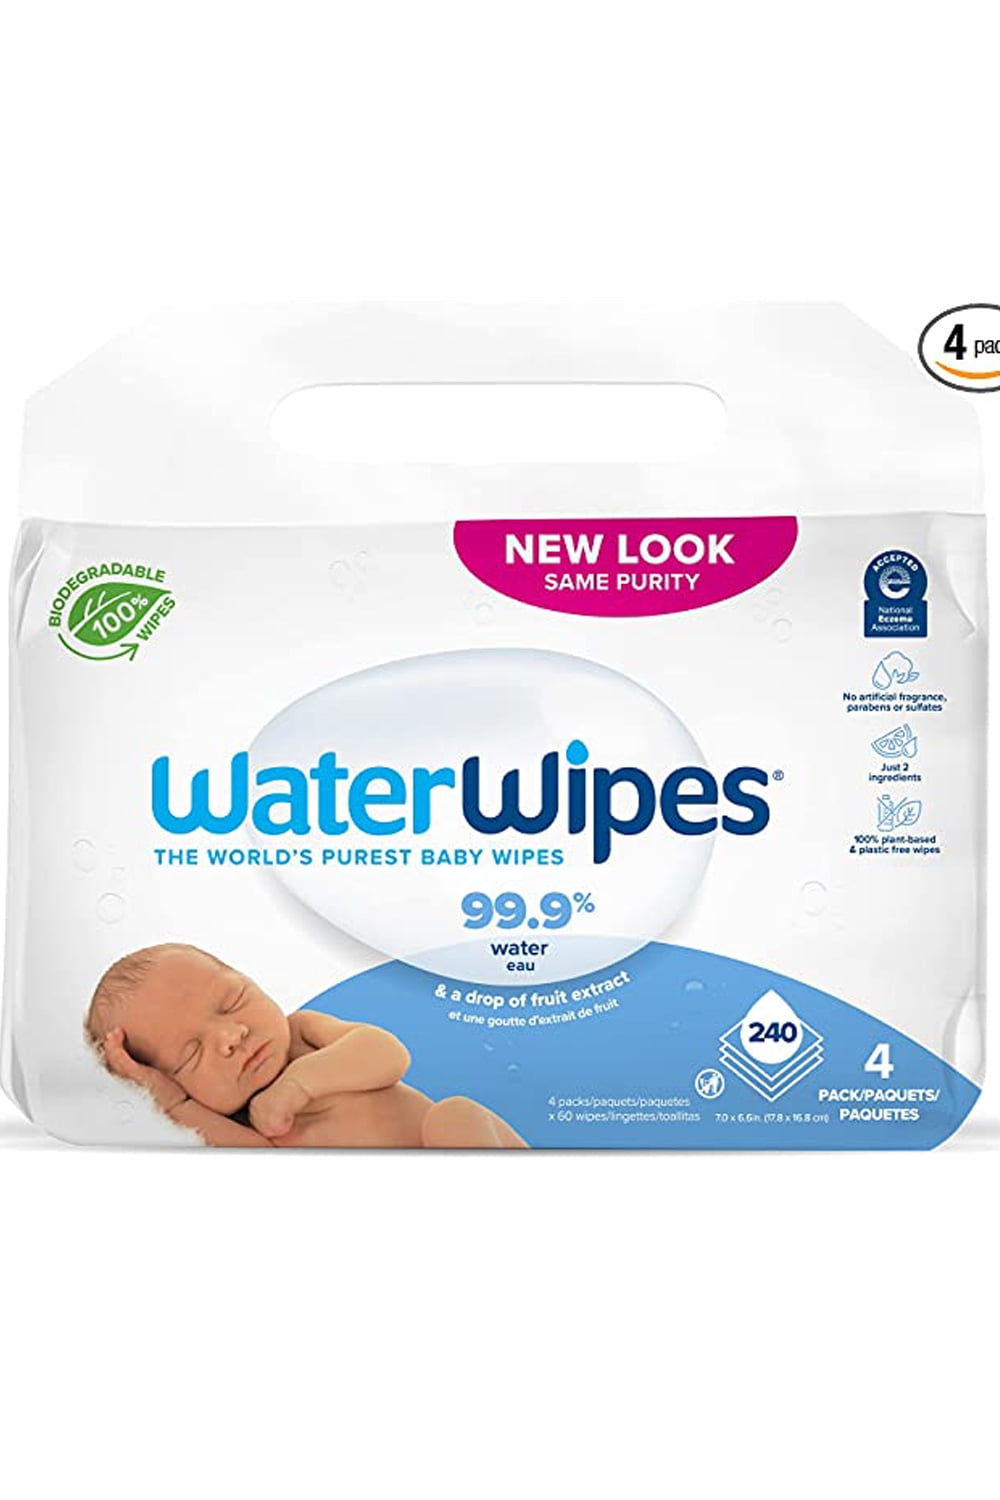 WaterWipes Baby Wipes, Value Pack - 4 packs, 60 Wipes